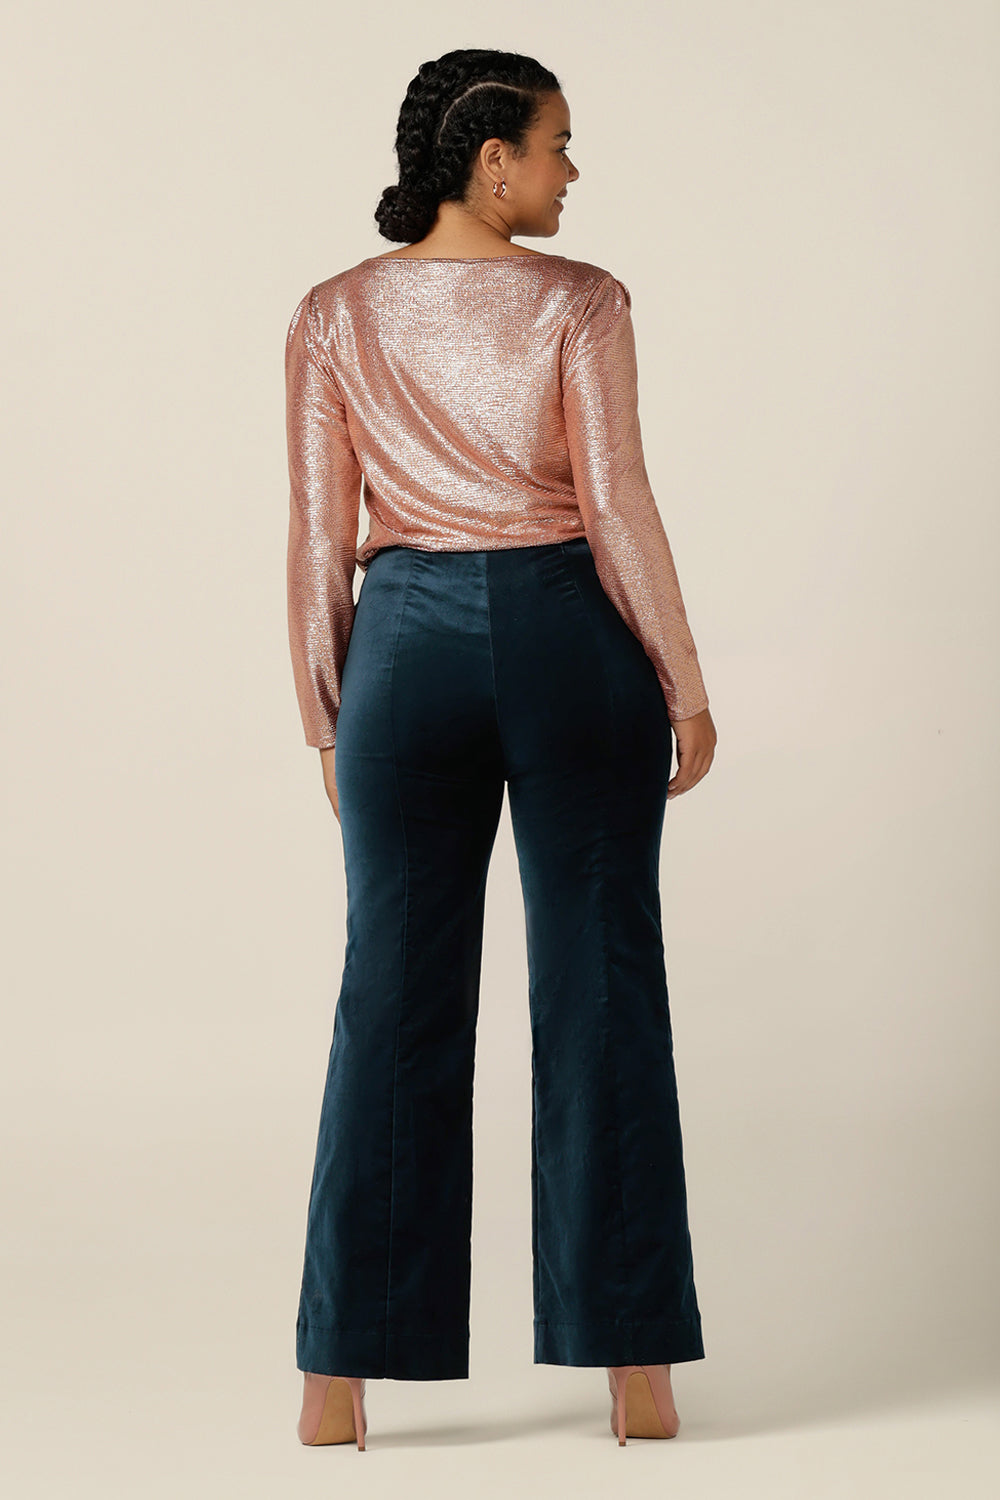 Back view of a size 12 woman wearing a shimmering pink sparkly top with high scoop neck and long sleeves, with flared leg velveteen trousers. Simple and easy-to-wear, this comfortable evening top is made in Australia in sizes 8 to 24. 